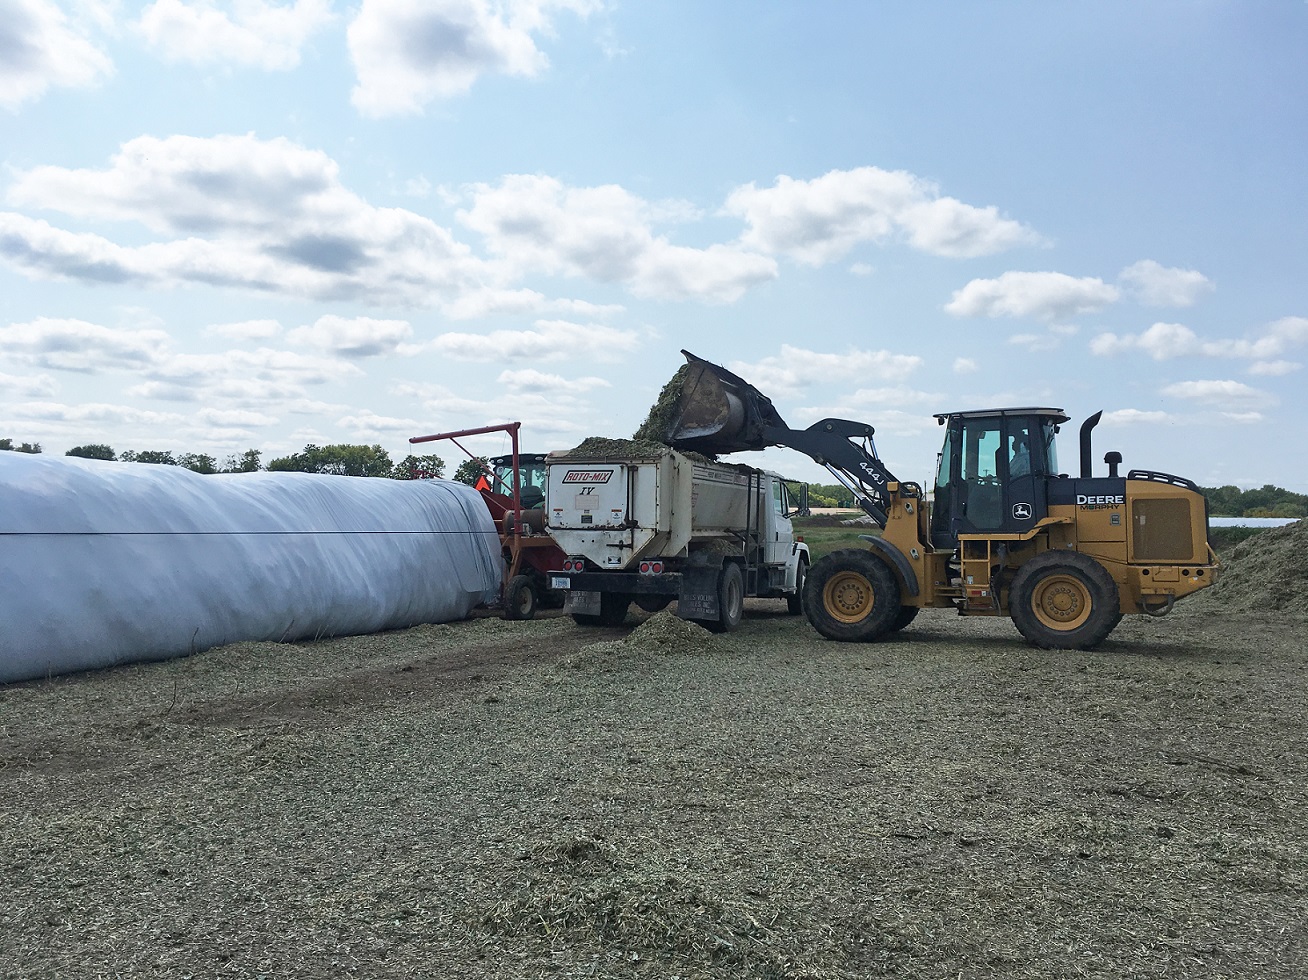 Details 54+ silage bags vs bunkers latest - in.cdgdbentre